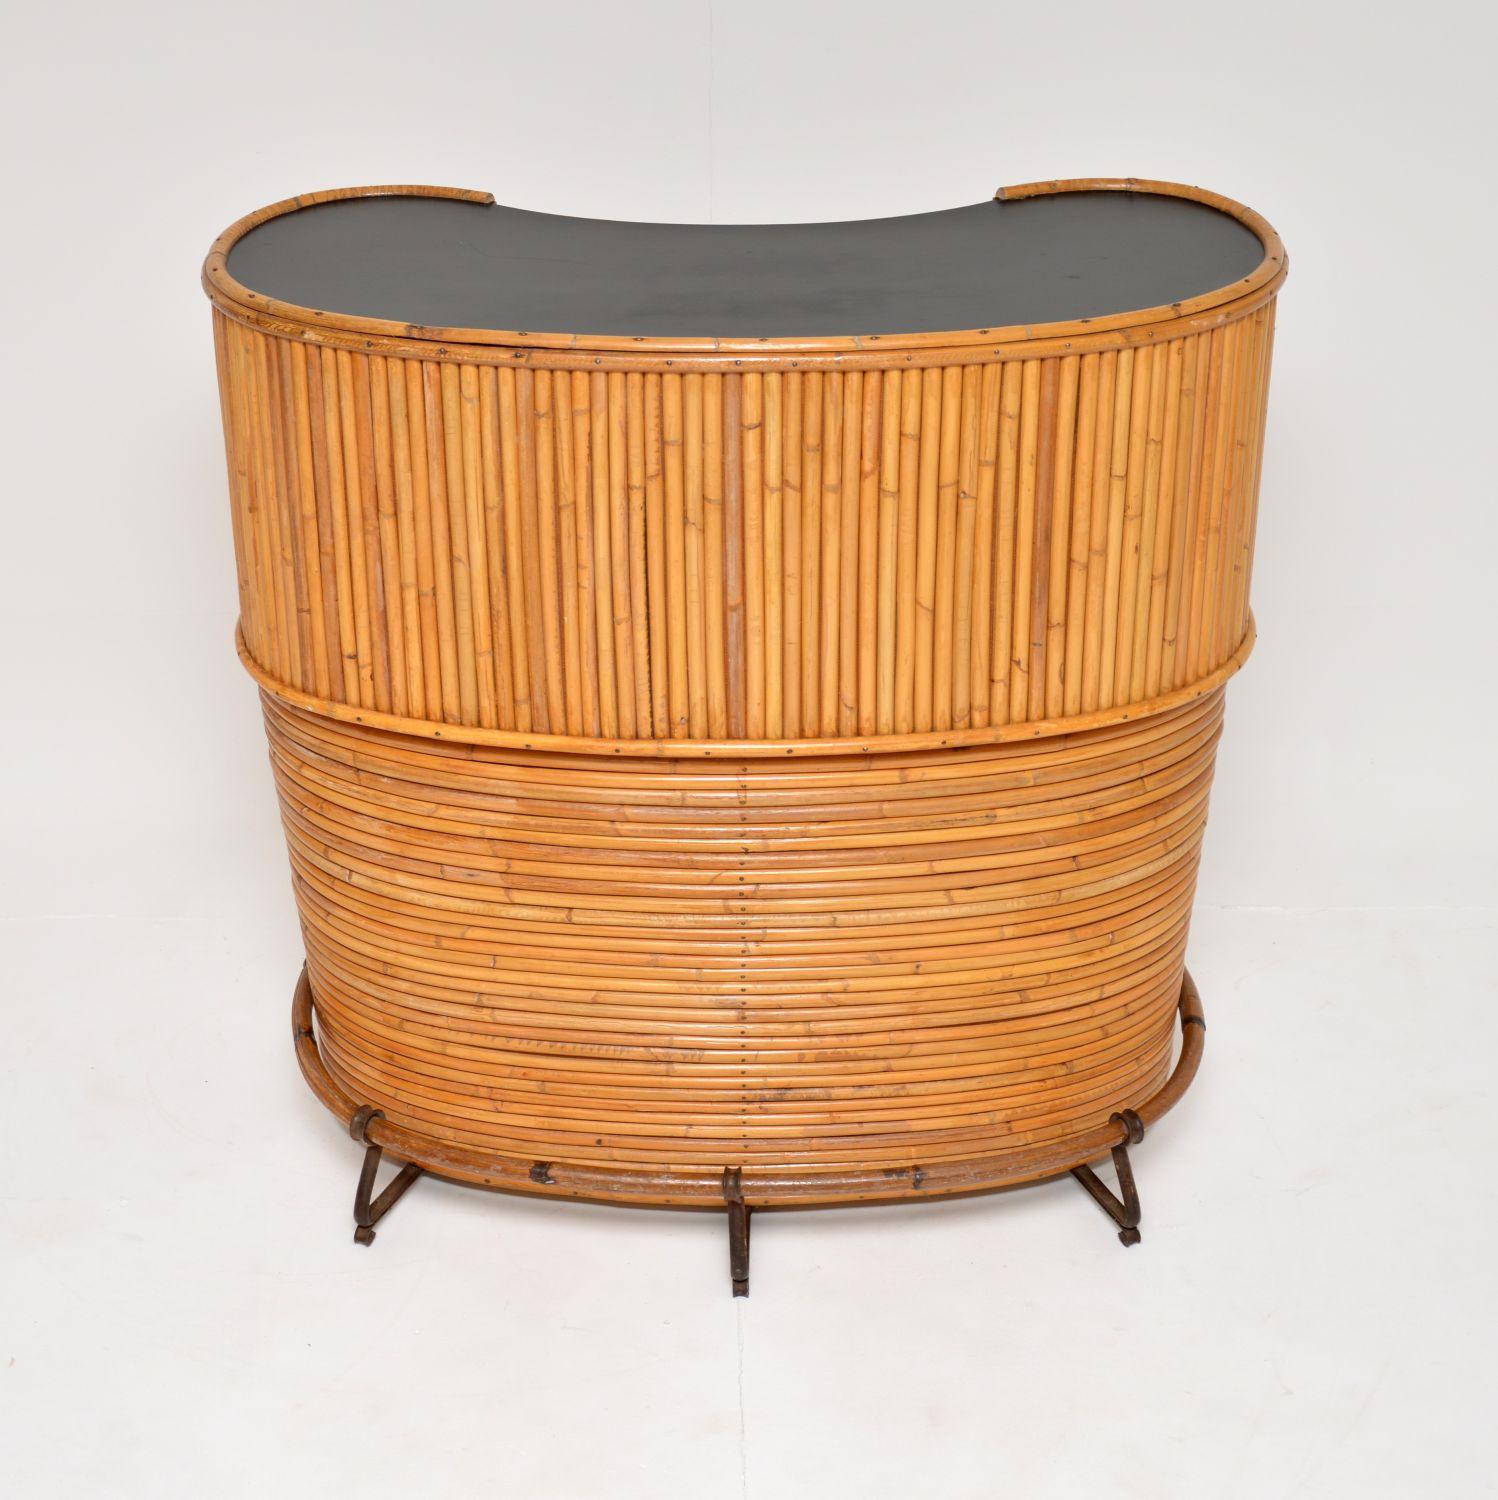 A fabulous vintage bamboo tiki cocktail drinks bar / cabinet. This was made in England, it dates from the 1960-70’s.

It is really well made, with a super stylish design. The overall shape is slightly curved, with a formica kidney shaped top,